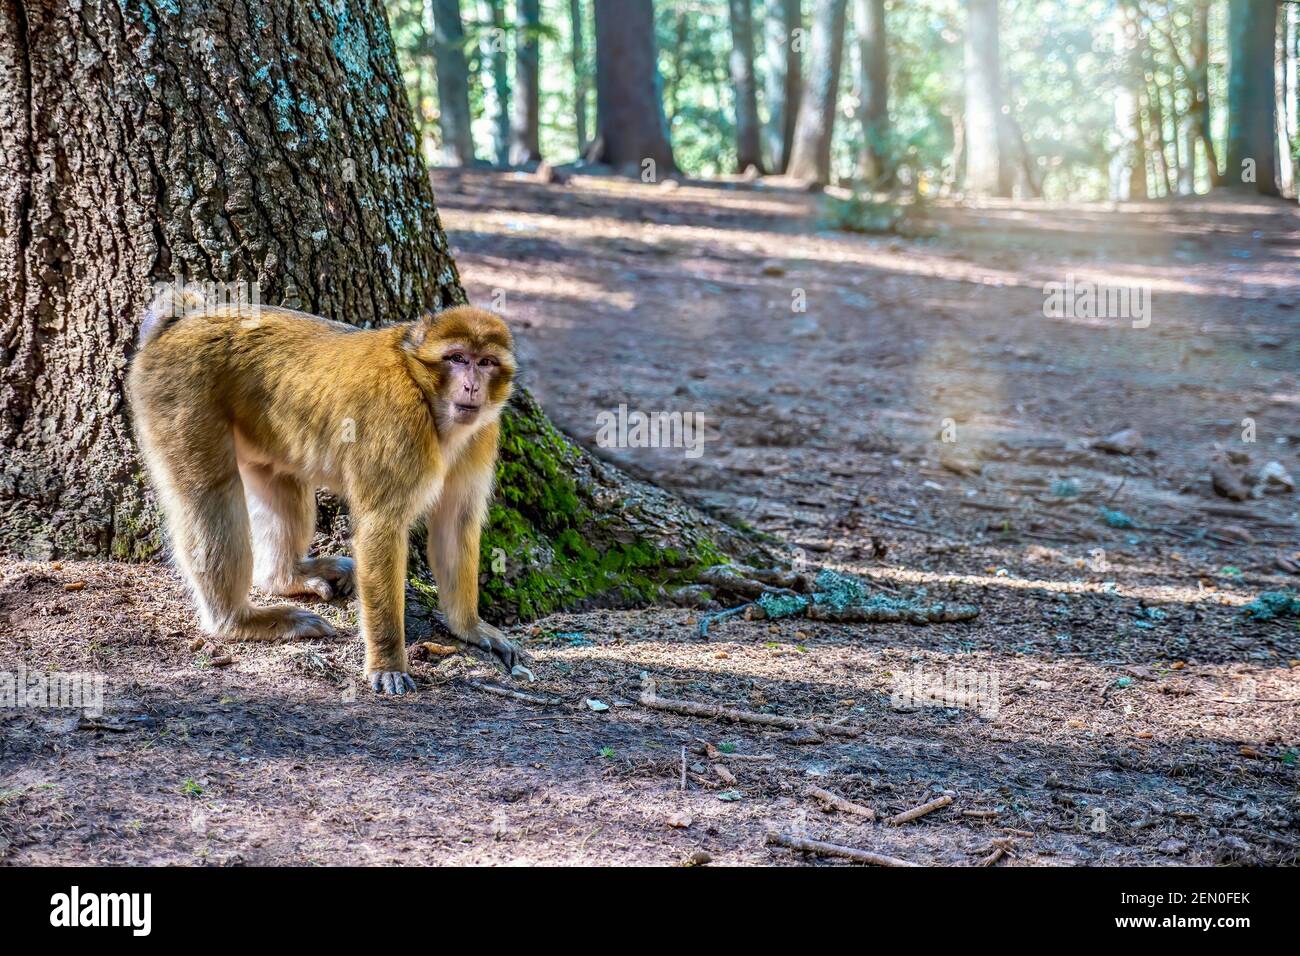 A Barbary macaque (Macaca sylvanus) at the base of a large cedar tree in Cedre Gouraud Forest in the Middle Atlas Mountains, Morocco. Stock Photo